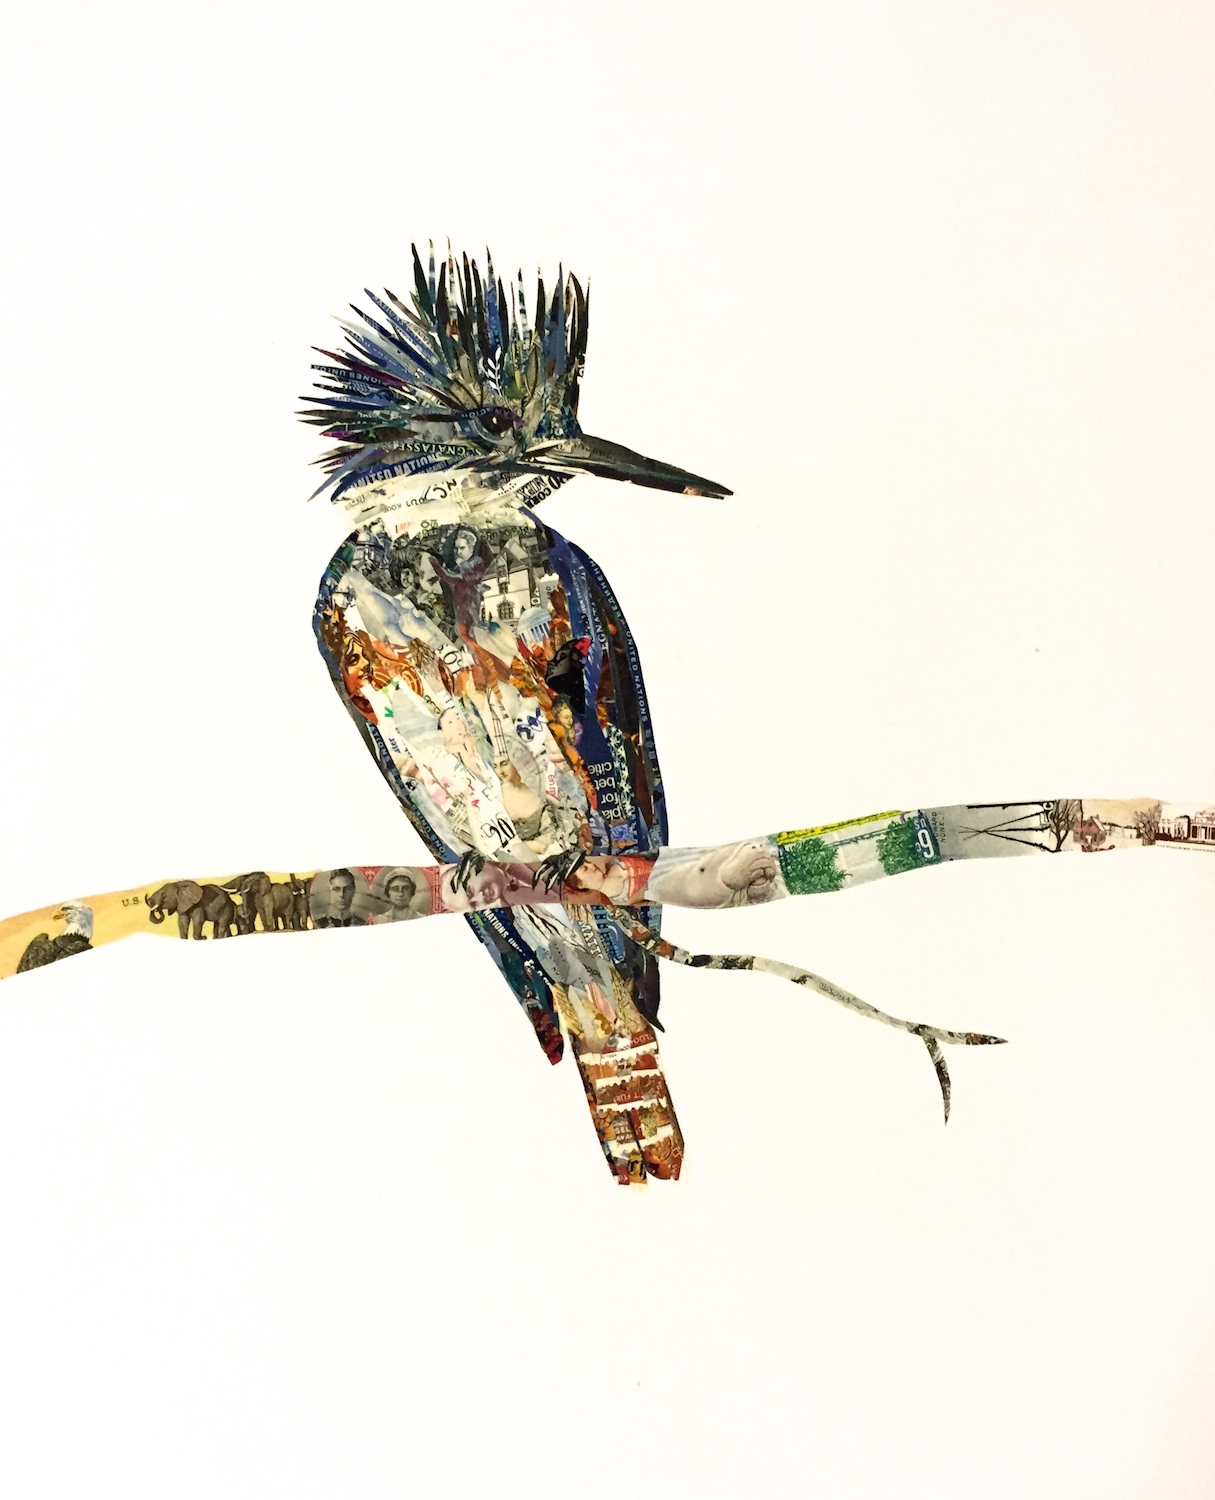 Kerry Buchman, Kingfisher, 2015. Postage stamps on paper, 15 x 12 in.